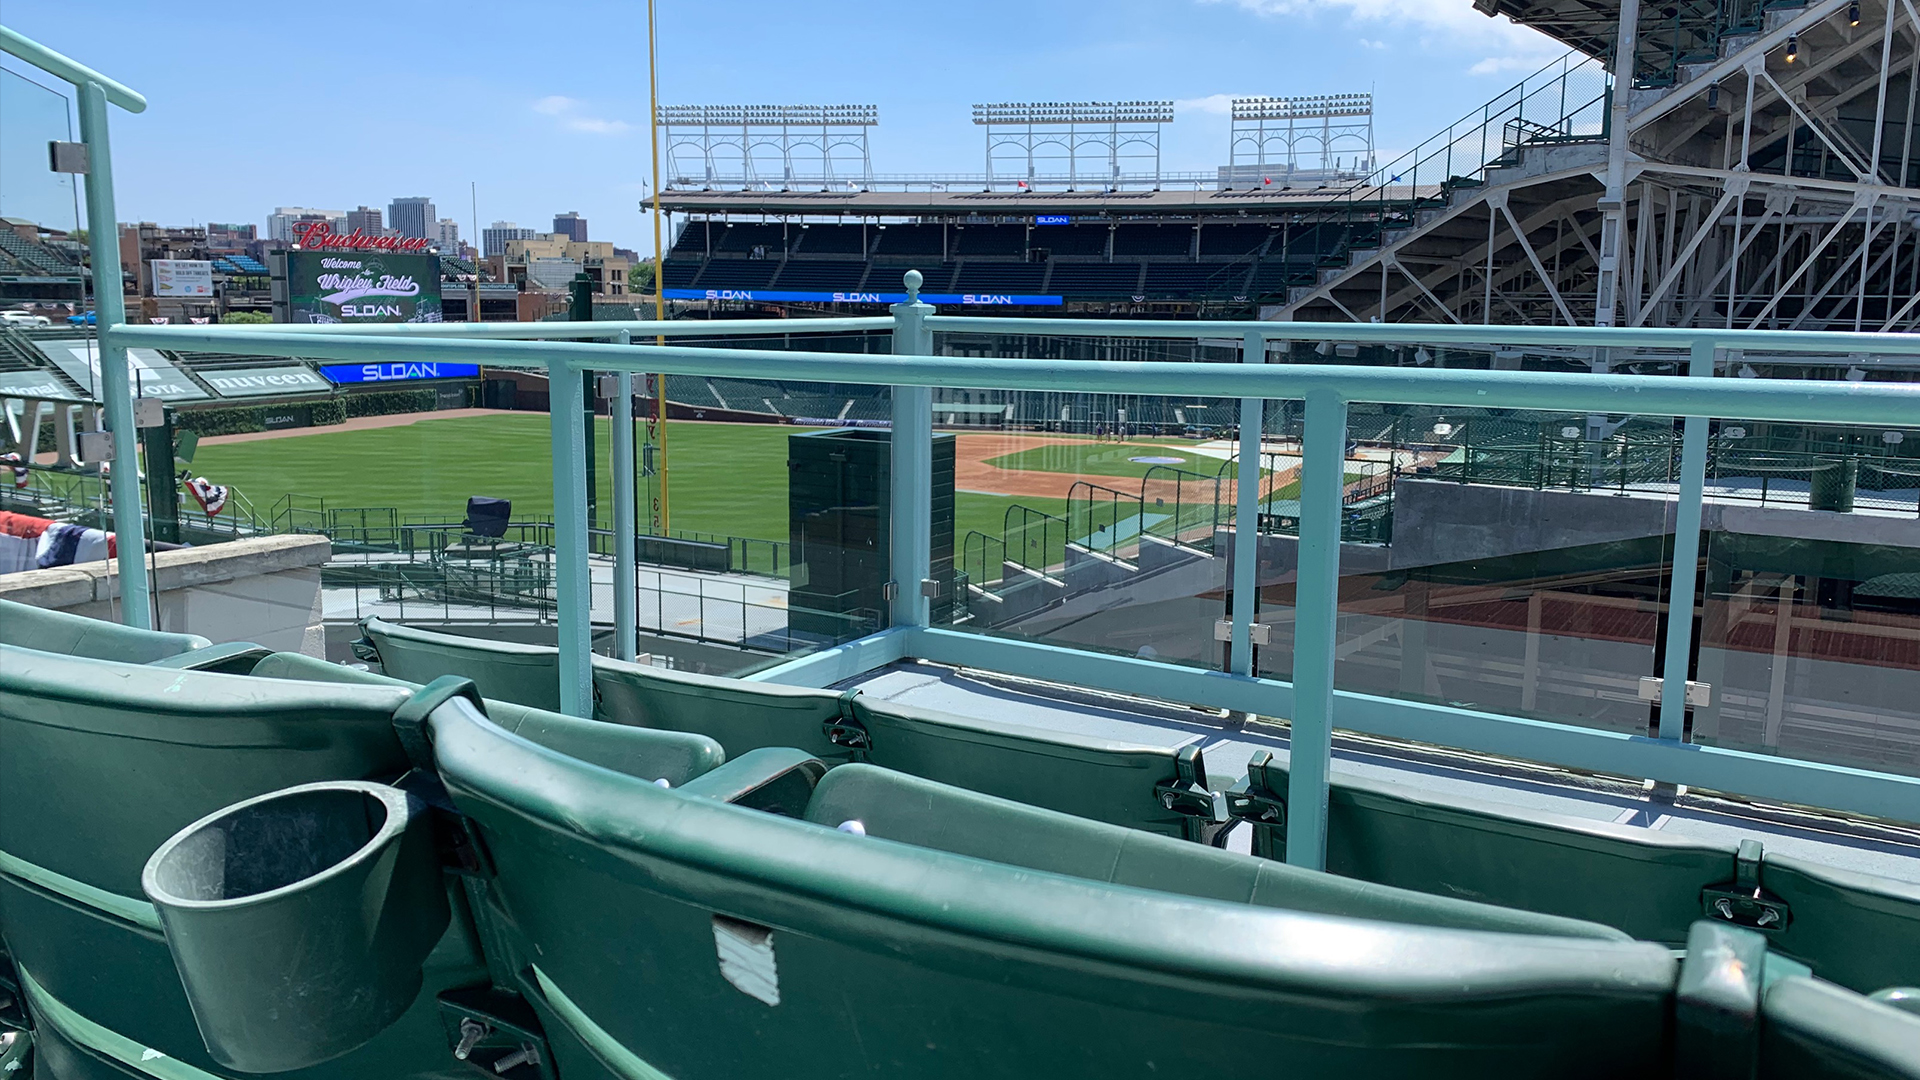 Wrigley Field rooftops to be open for business for Cubs home games